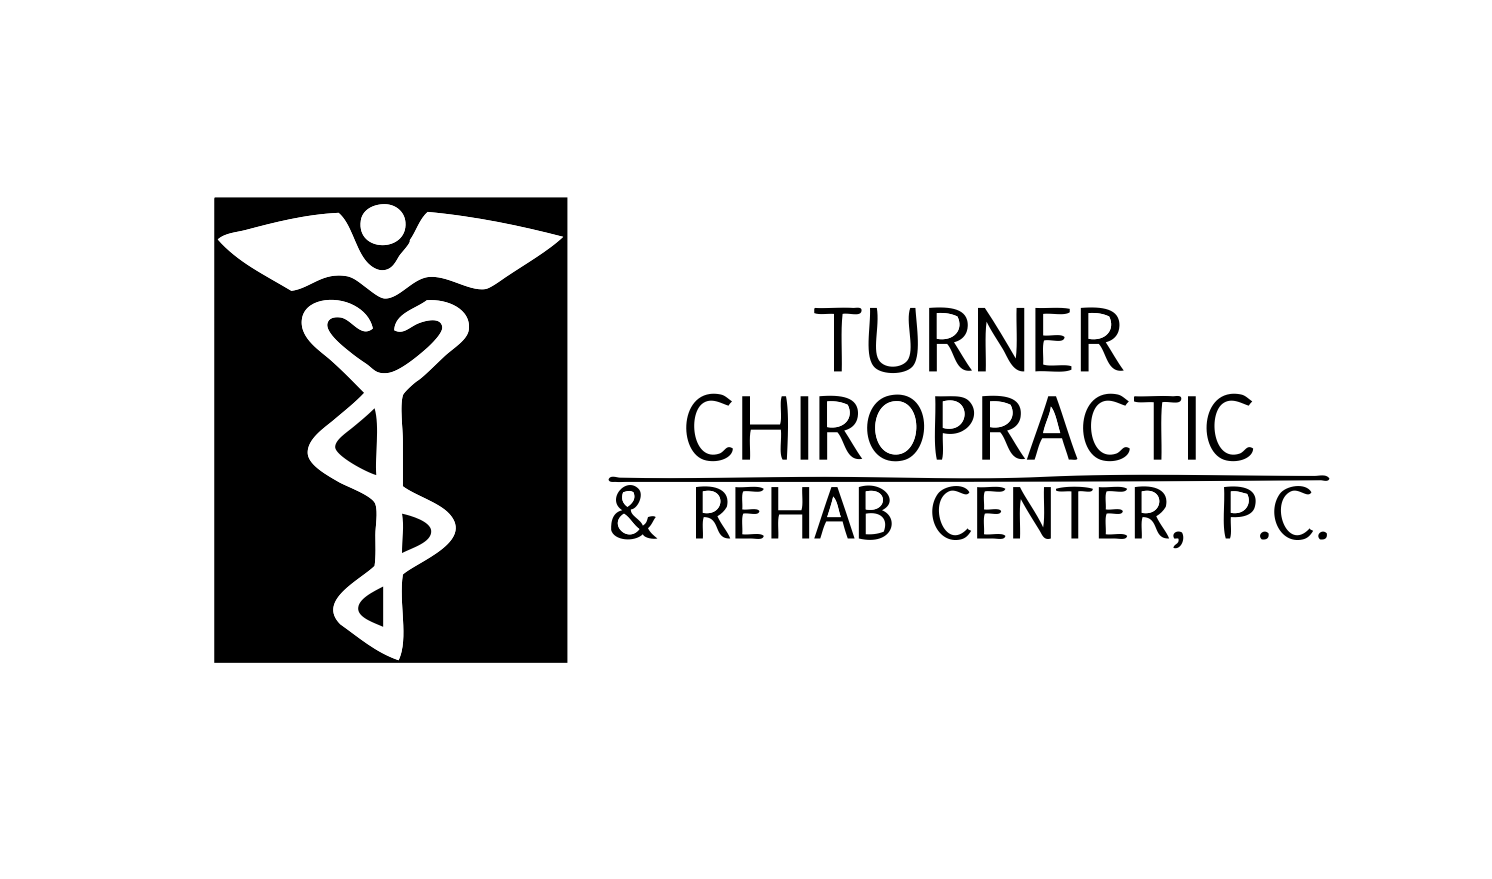 Turner Chiropractic & Rehab Center 320 E Army Trail Rd, Glendale Heights Illinois 60139